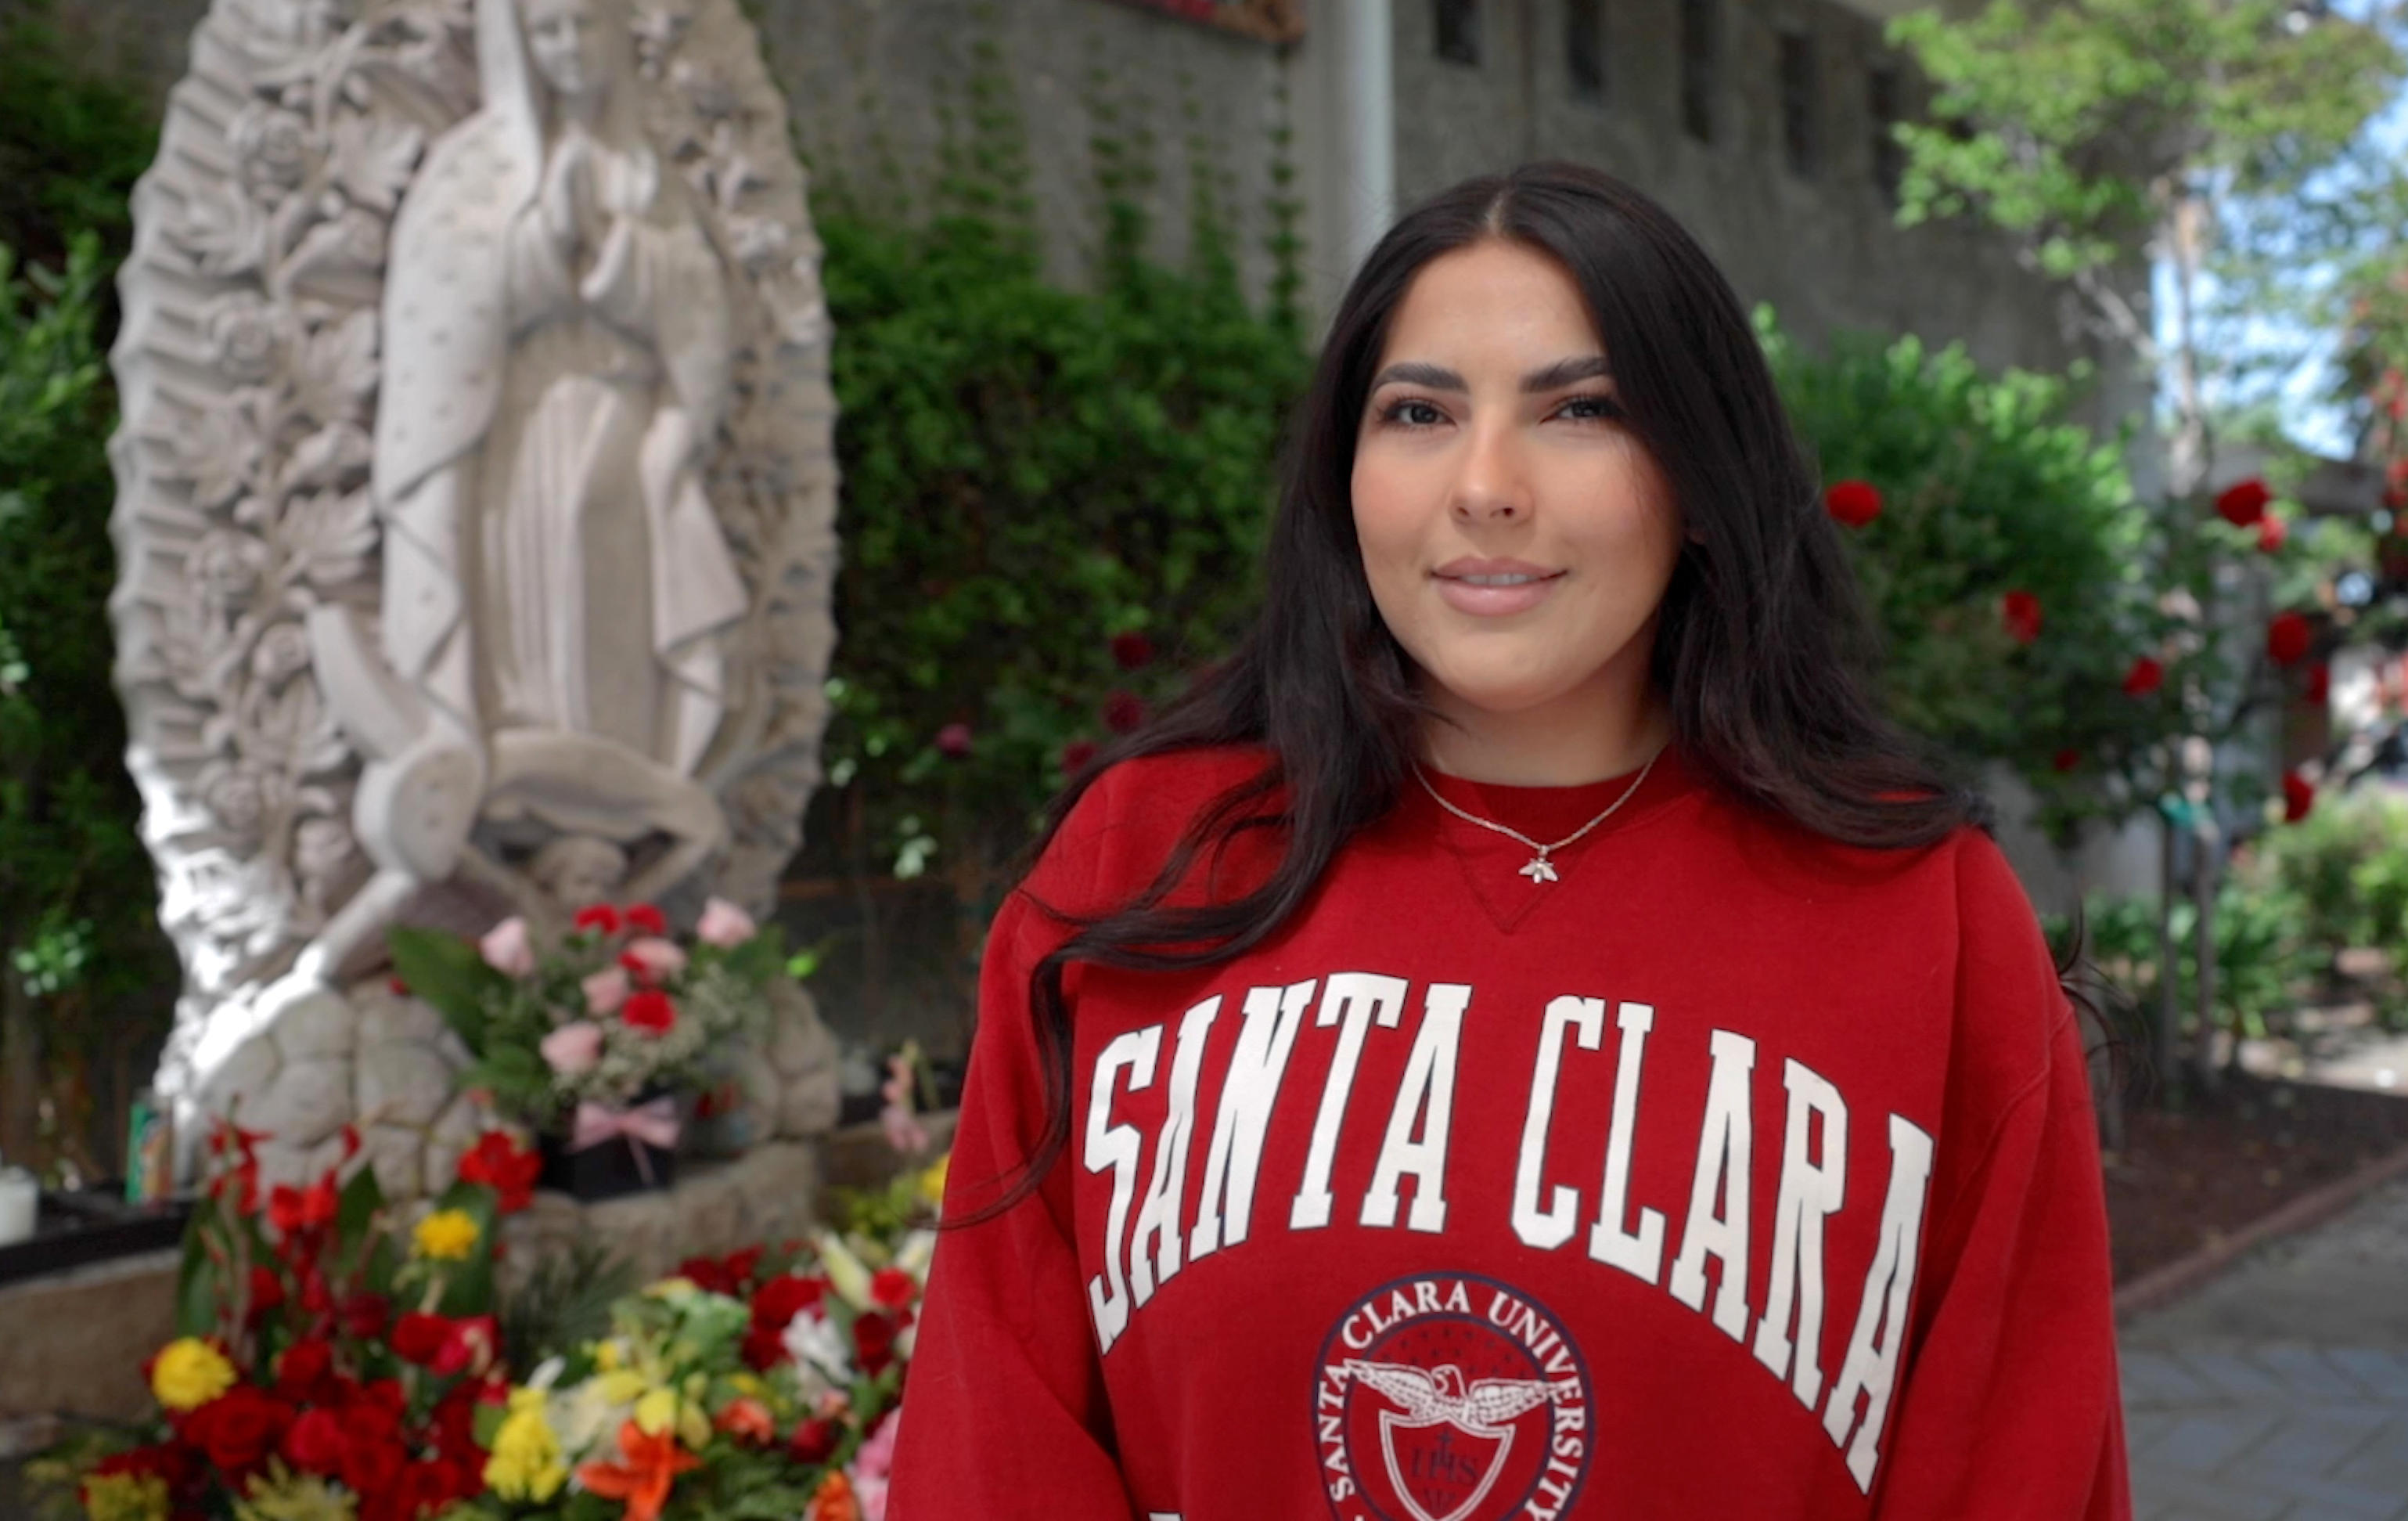 Jessica Cuellar stands in front of church in San Jose image link to story